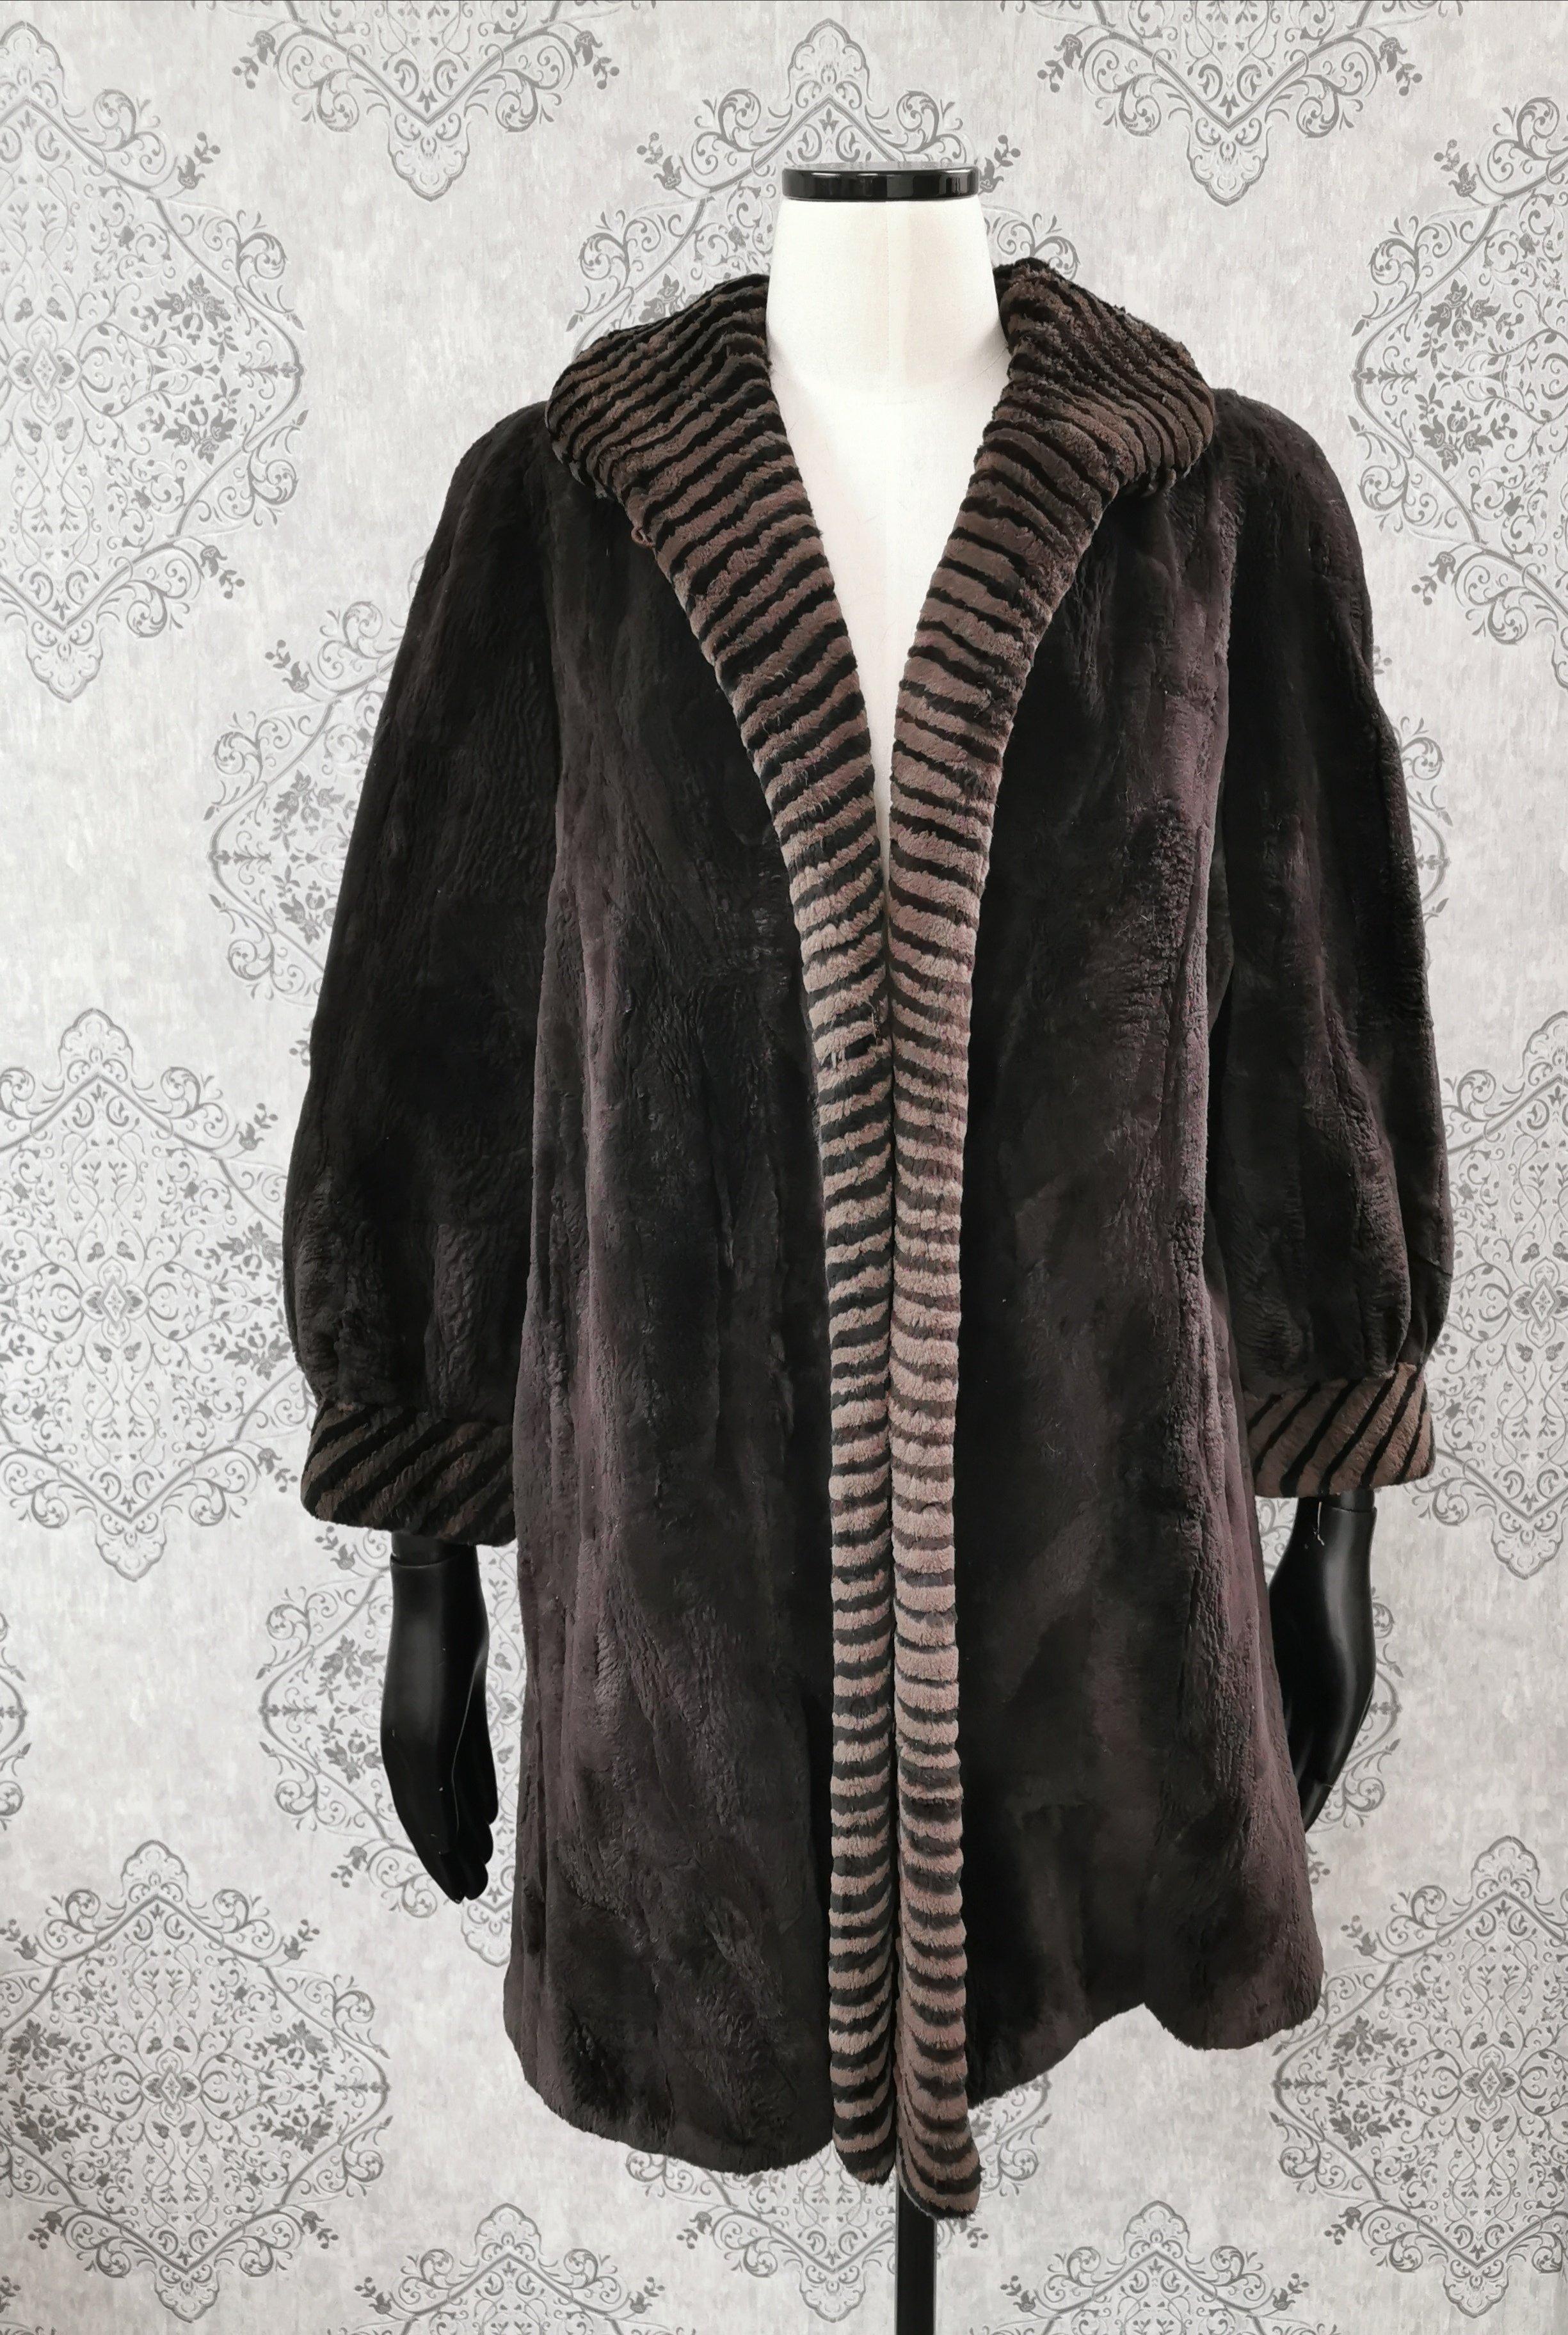 PRODUCT DESCRIPTION:

Brand new velvety Sheared Beaver fur stroller coat with a striped pattern fur trim for cuffs and collar to hem.

Condition: Like new

Closure: Hooks & Eyes

Color: Brown, beige

Material: Sheared Beaver

Garment type: Stroller